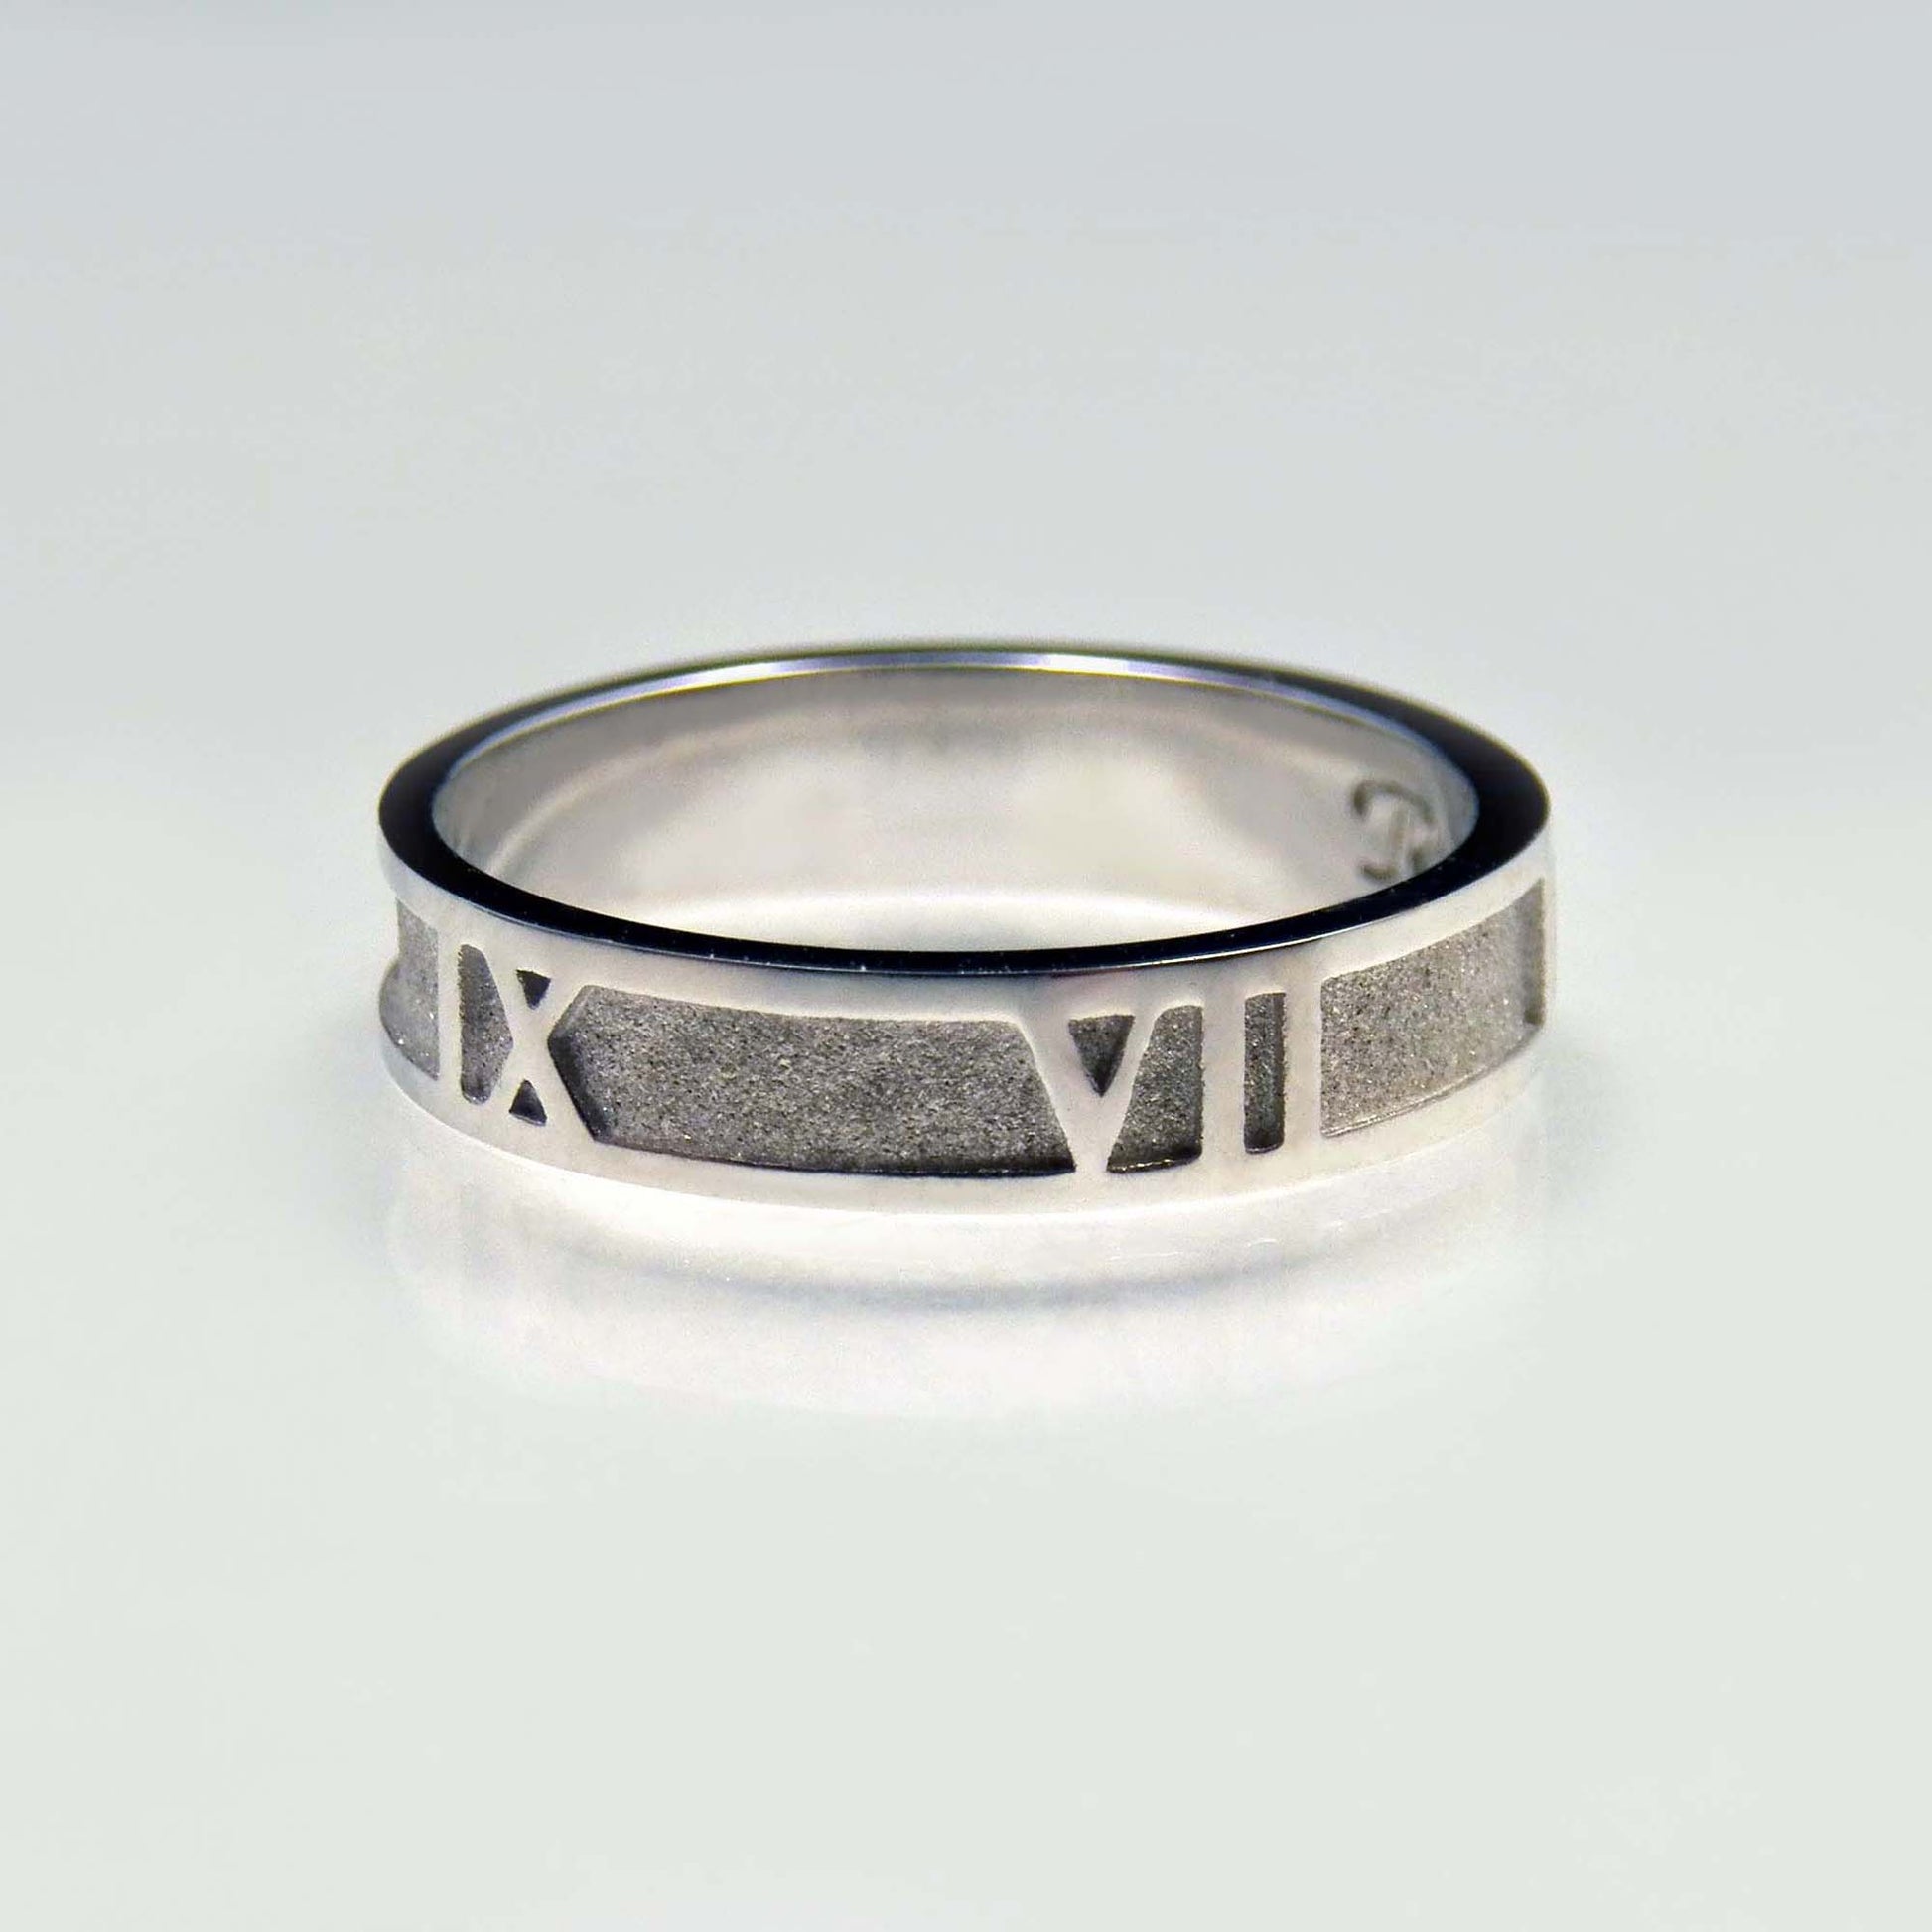 Band ring with deep relief a Times Roman font